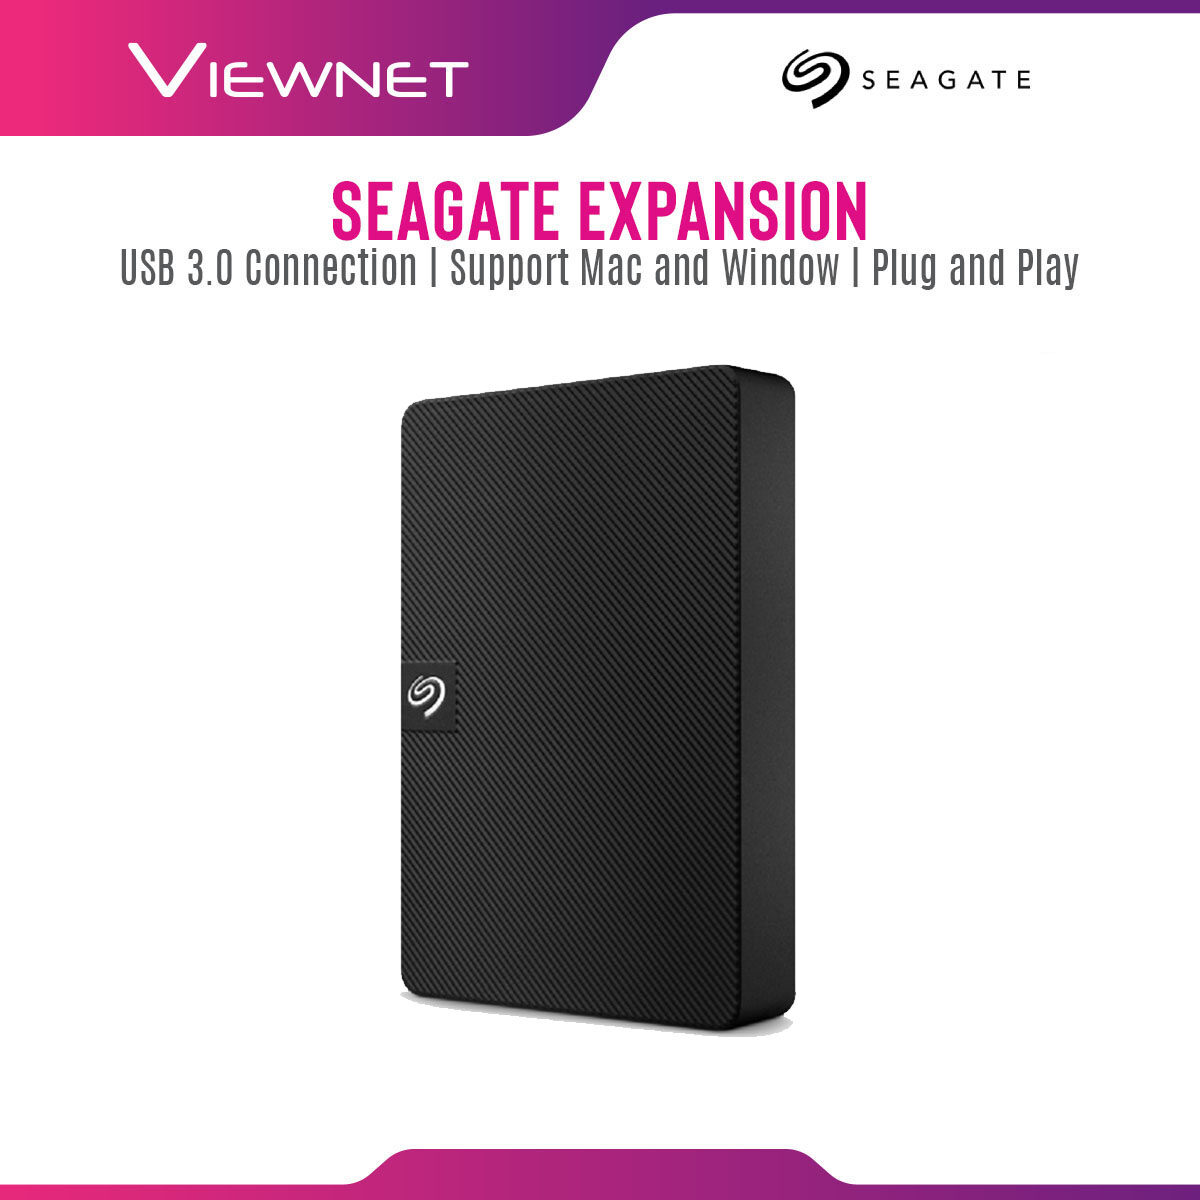 Seagate Expansion 1TB / 1.5TB / 2TB / 4TB USB 3.0 Portable External Hard Drive with Drag-and-Drop File Saving Windows Compatibility External Hard Disk